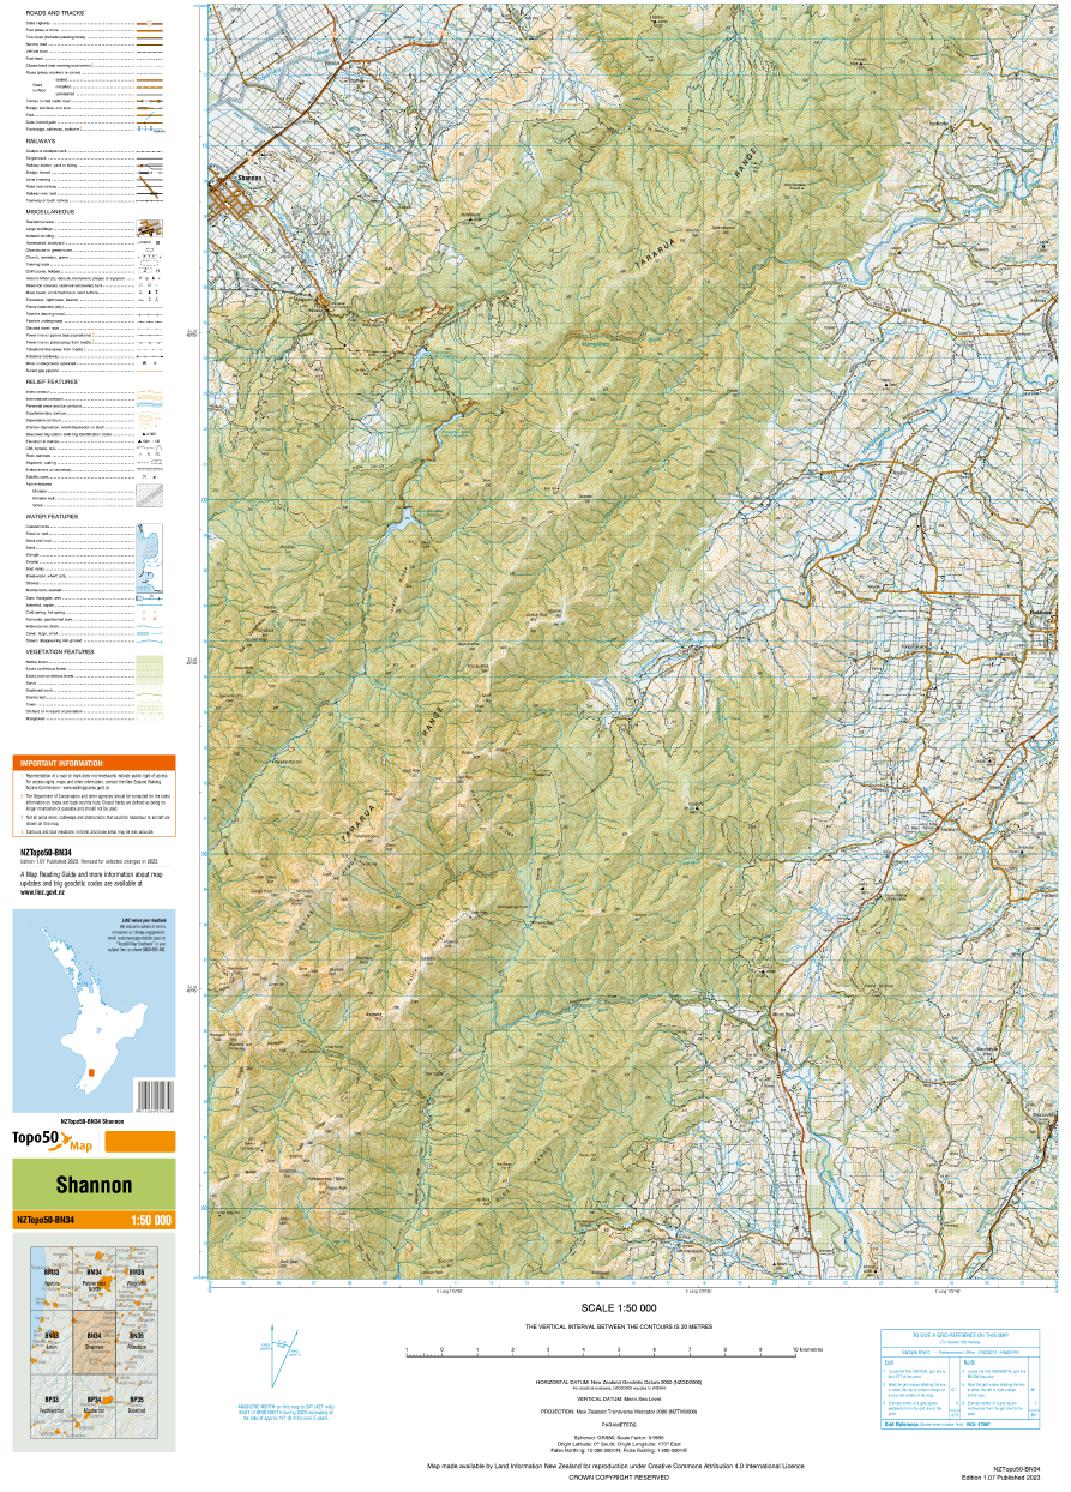 Topo map of Shannon